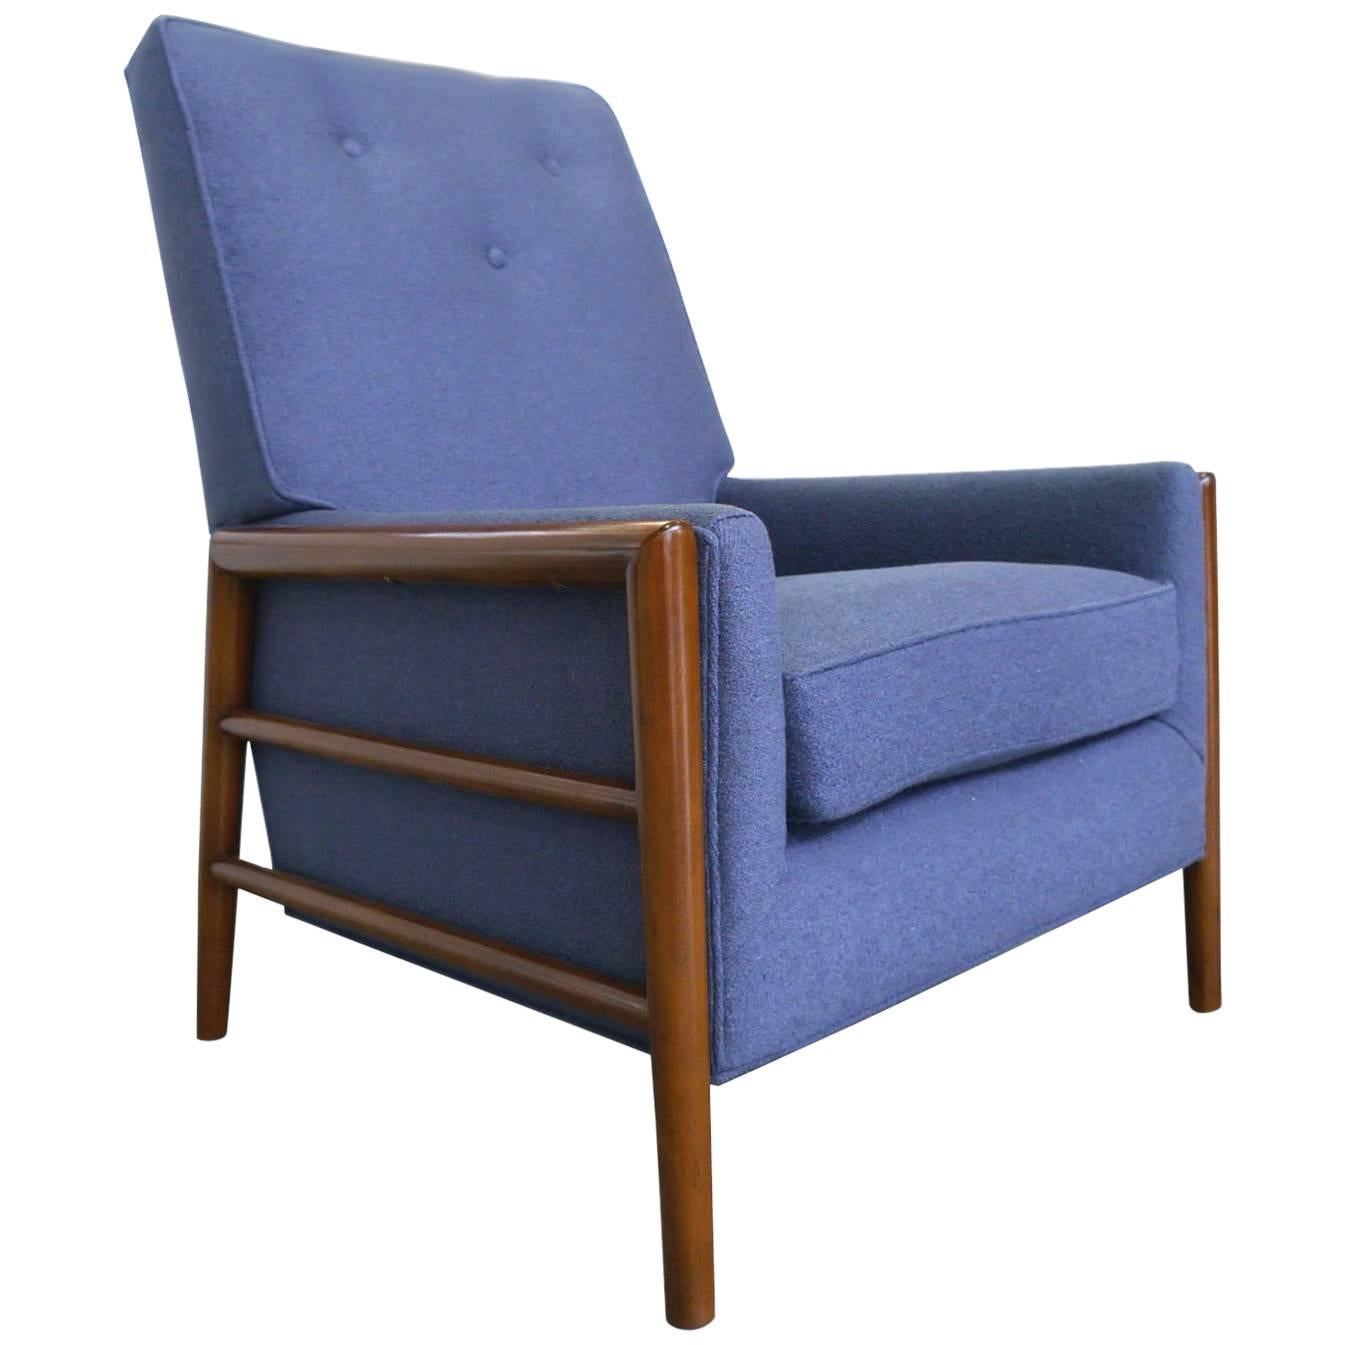 Mid-20th Century Bouclé & Maple Armchair Attributed to T.H. Robsjohn-Gibbings